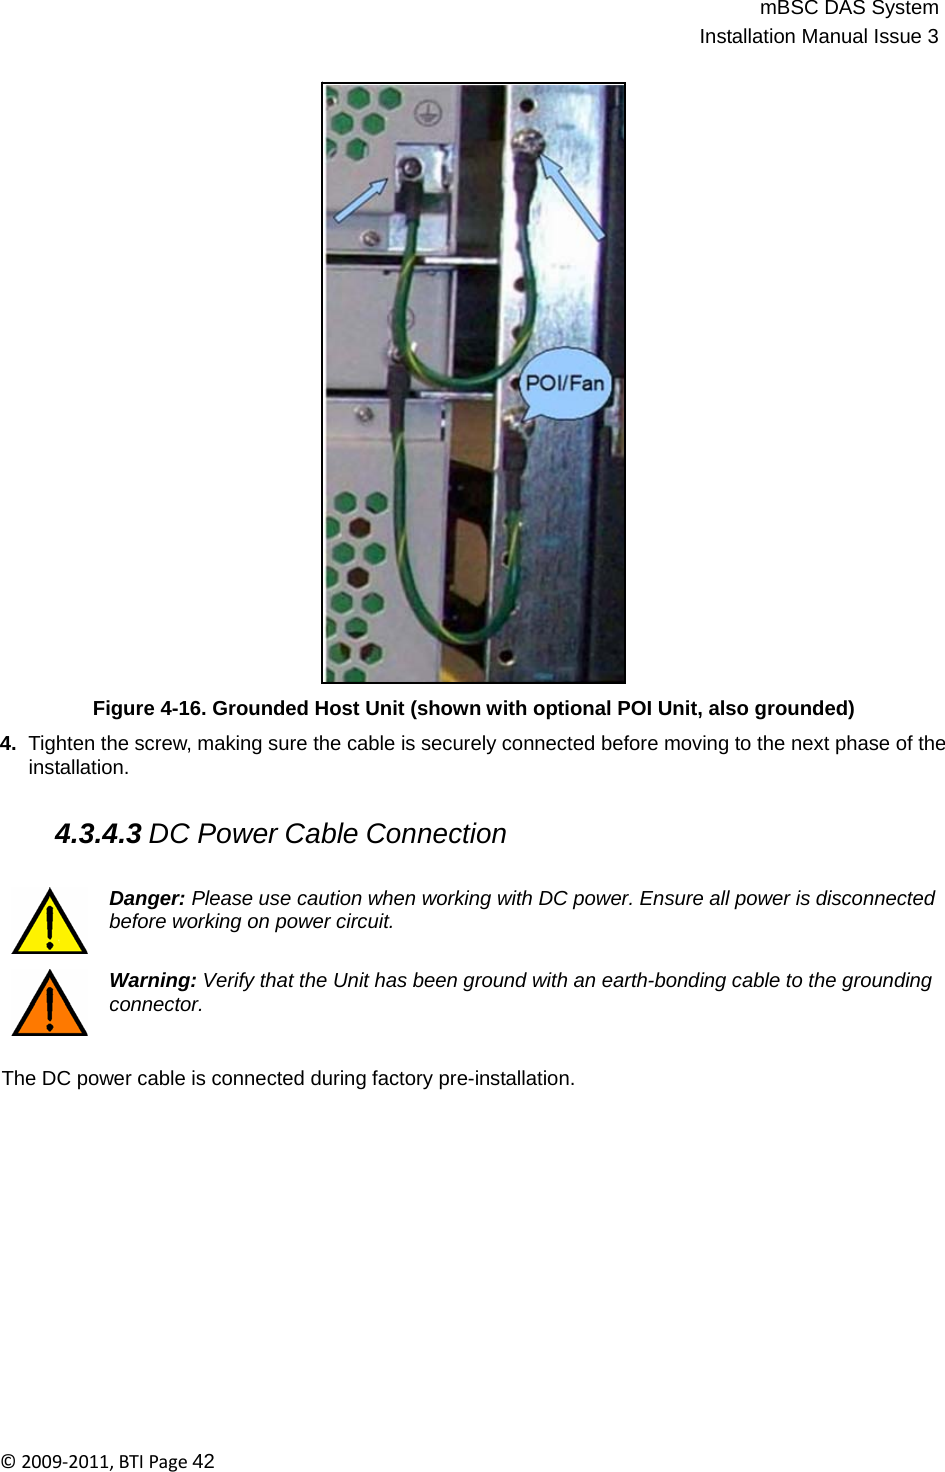 mBSC DAS SystemInstallation Manual Issue 3©2009‐2011,BTIPage42                                 Figure 4-16. Grounded Host Unit (shown with optional POI Unit, also grounded)  4.  Tighten the screw, making sure the cable is securely connected before moving to the next phase of the installation.   4.3.4.3 DC Power Cable Connection   Danger: Please use caution when working with DC power. Ensure all power is disconnected before working on power circuit.   Warning: Verify that the Unit has been ground with an earth-bonding cable to the grounding connector.   The DC power cable is connected during factory pre-installation. 